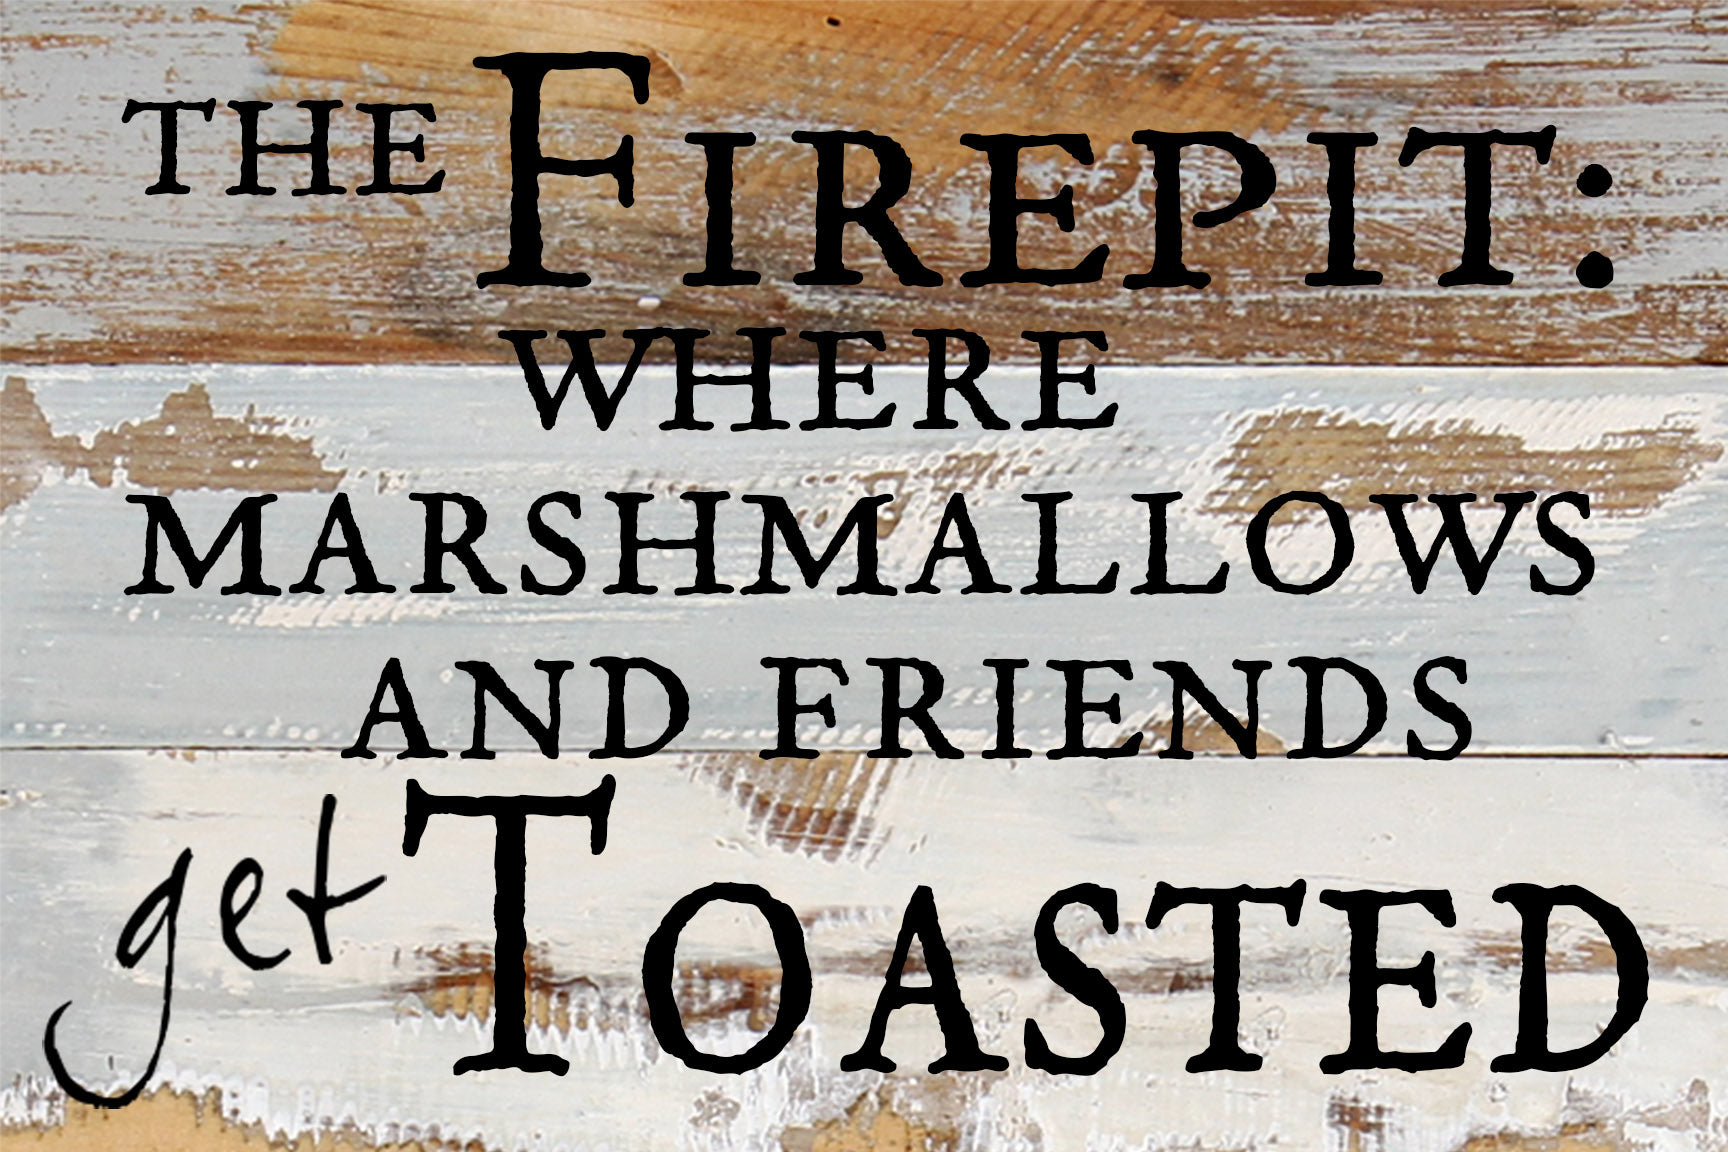 The Firepit: where marshmallows and friends get toasted / 12x8 Reclaimed Wood Wall Art